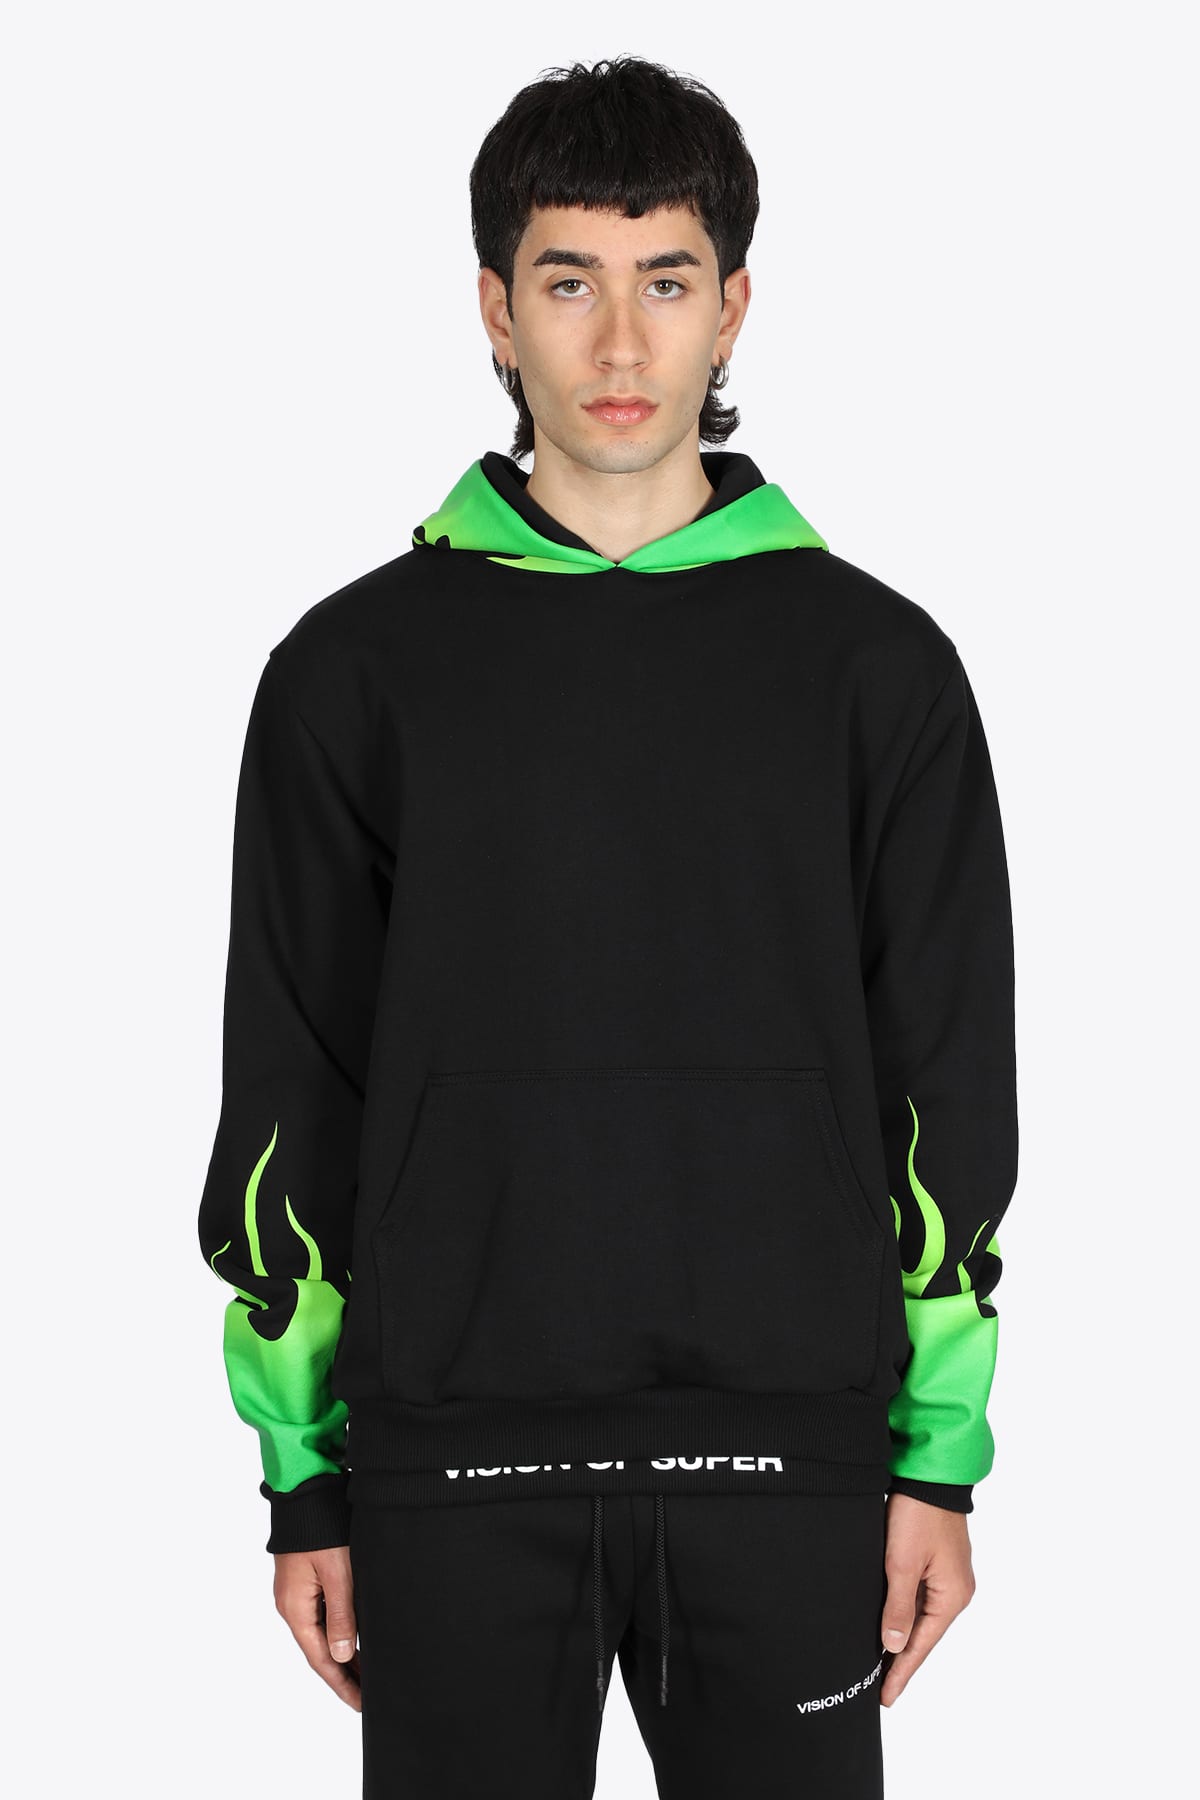 Vision of Super Vos/b2greensfu Cotton Black cotton hoodie with green flames